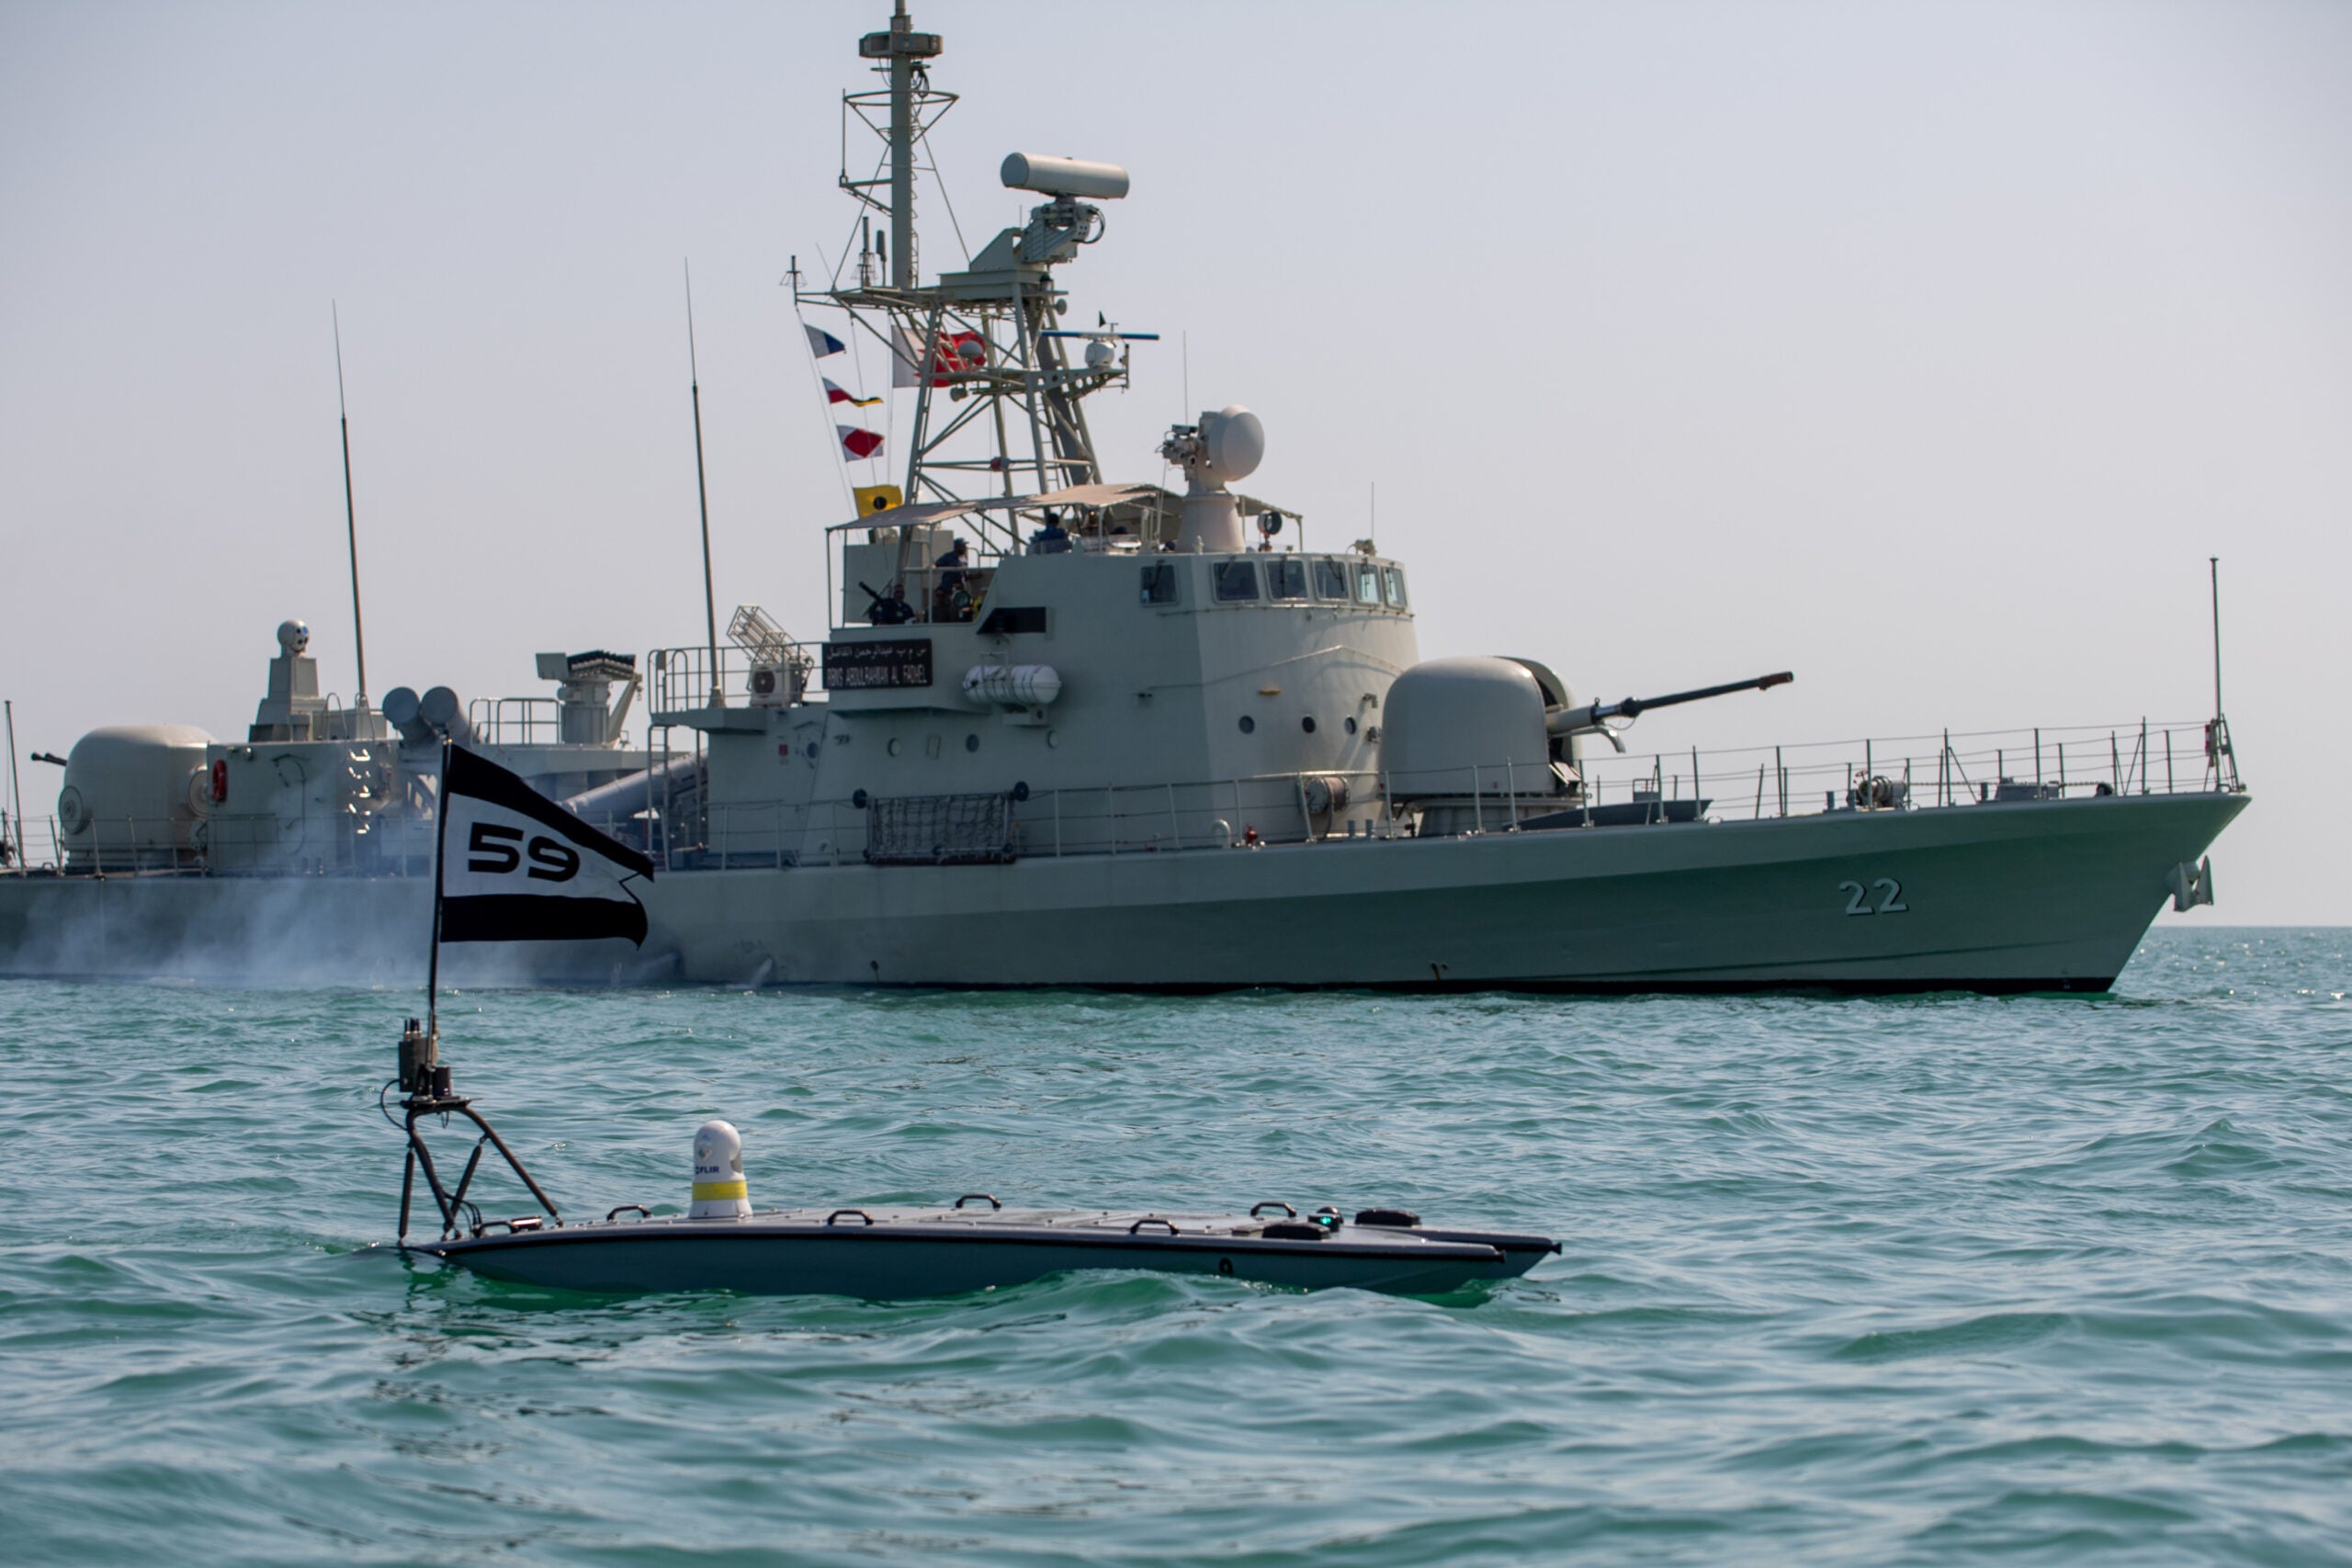 A MANTAS T-12 unmanned surface vessel (USV), front, operates alongside Royal Bahrain Naval Force fast-attack craft RBNS Abdul Rahman Al-fadel (P22) during exercise New Horizon in the Arabian Gulf, Oct. 26. Exercise New Horizon was U.S. Naval Forces Central Command Task Force 59’s first at-sea evolution since its establishment Sept. 9. (U.S. Navy photo by Mass Communication Specialist 2nd Class Dawson Roth)